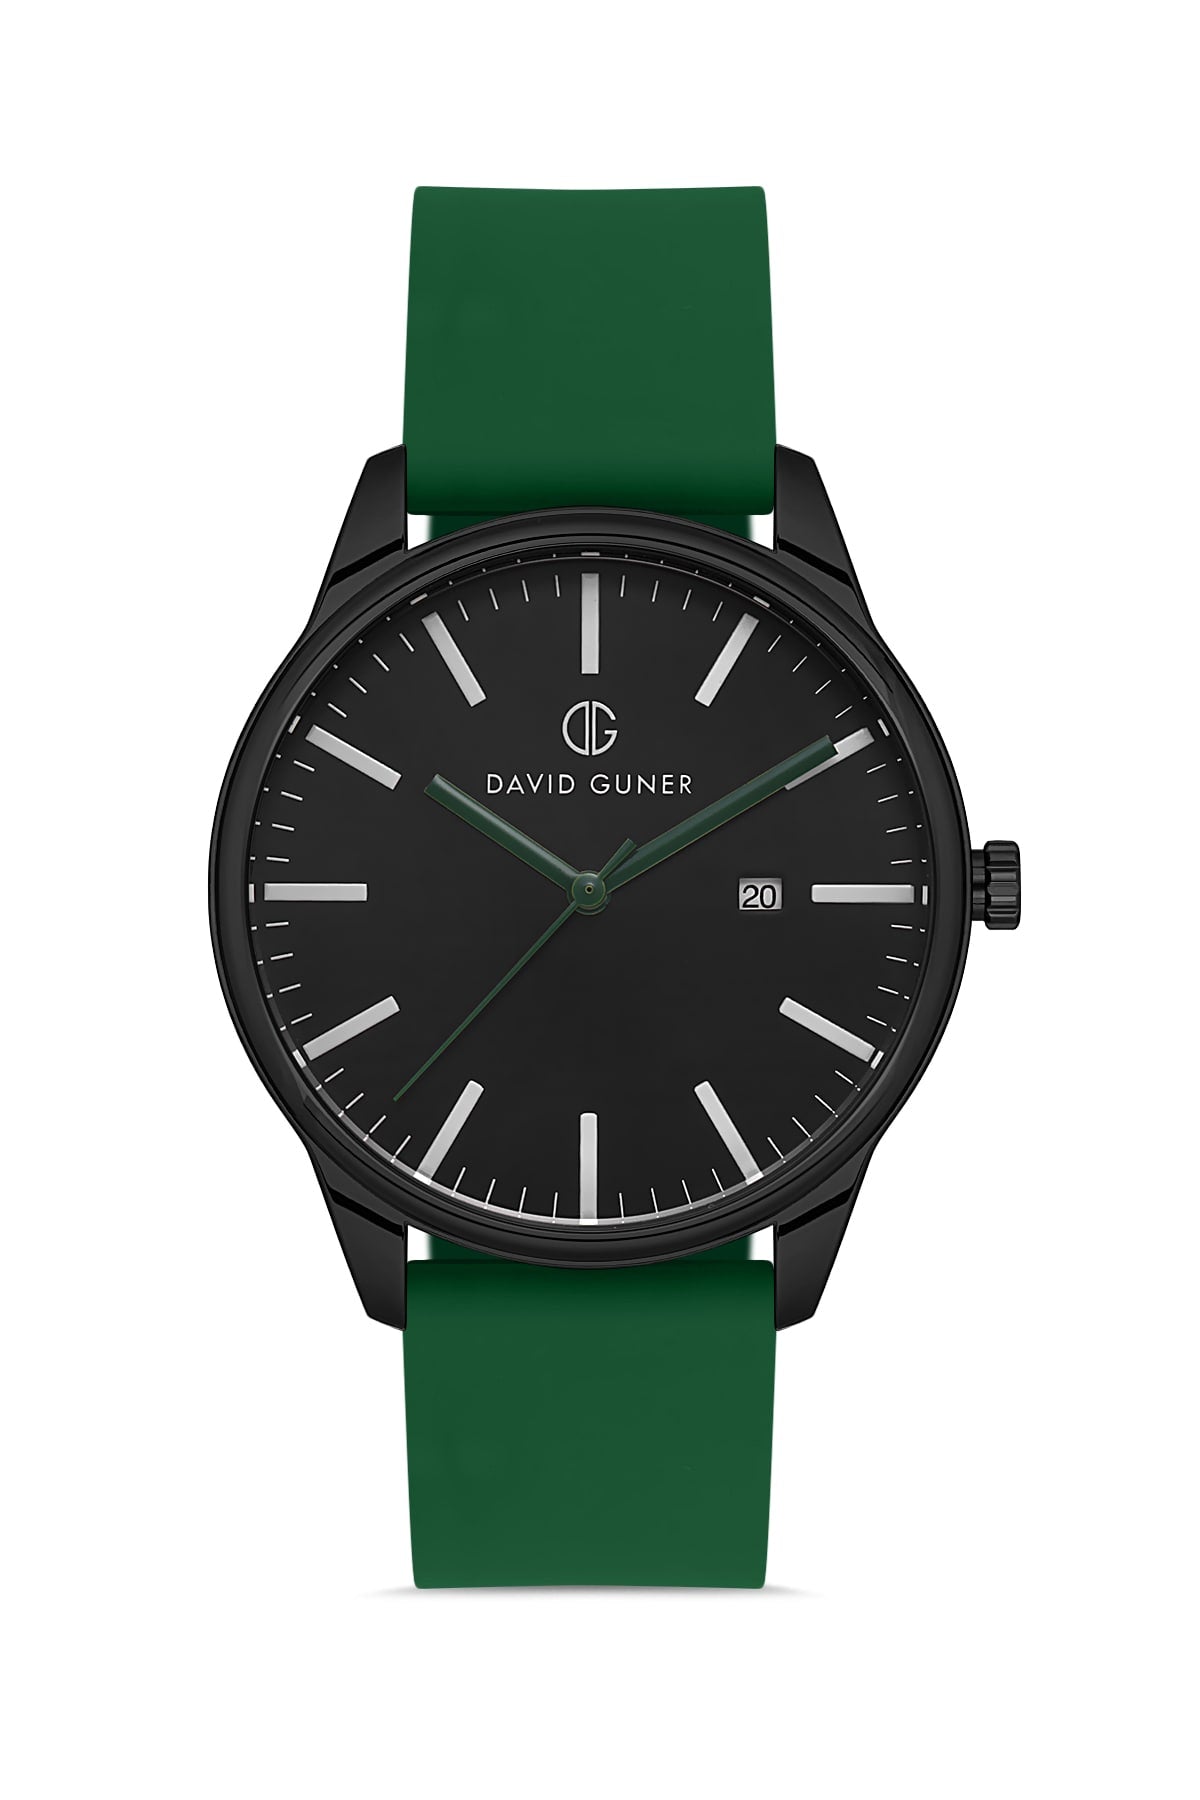 DAVID GUNER Men's Wristwatch with Black Dial and Green Silicone Strap with Calendar